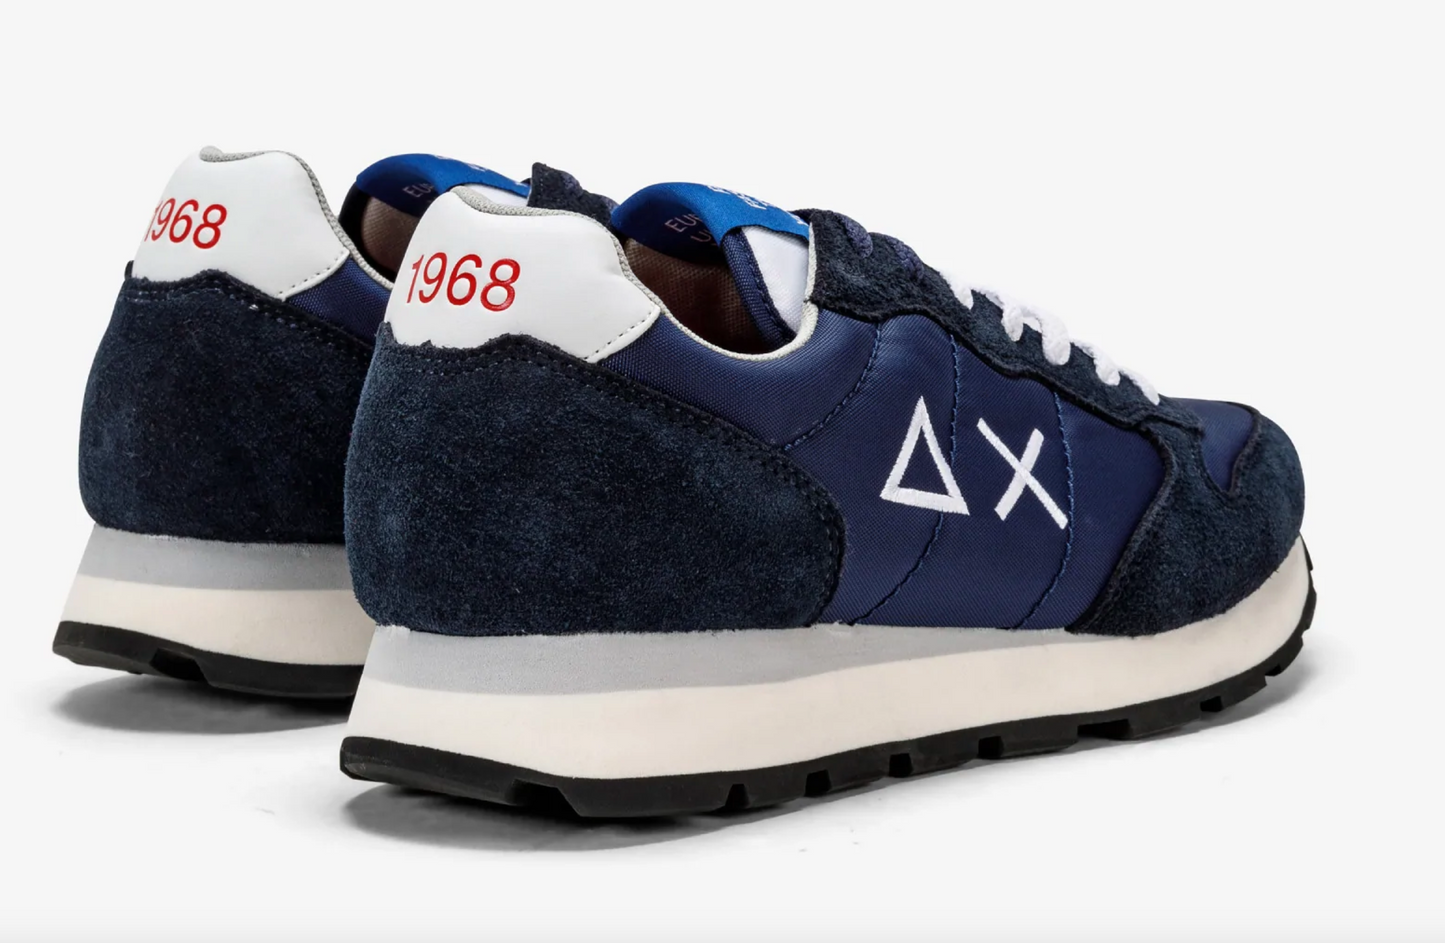 Elevated Blue Navy Men's Sneakers with Leather Accents